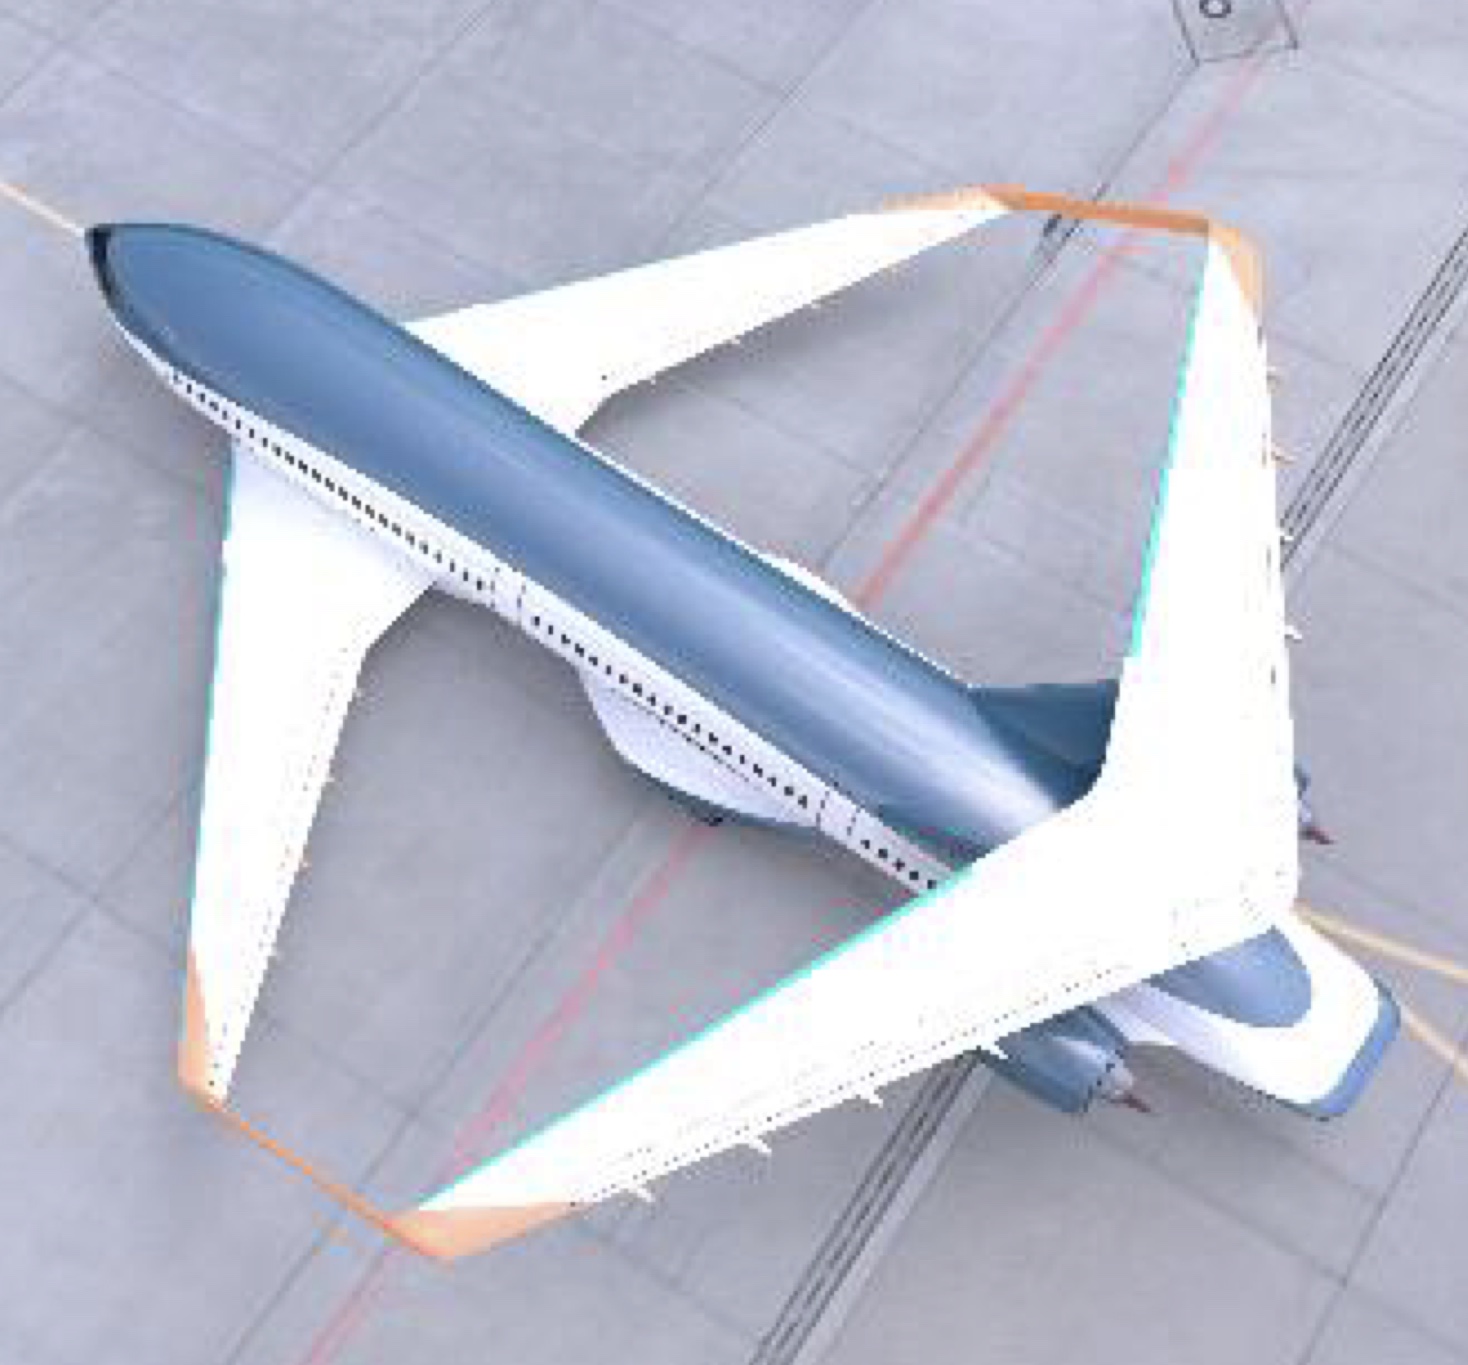 Parsifal Box-wing design in IATA Aircraft Technology Roadmap to 2050